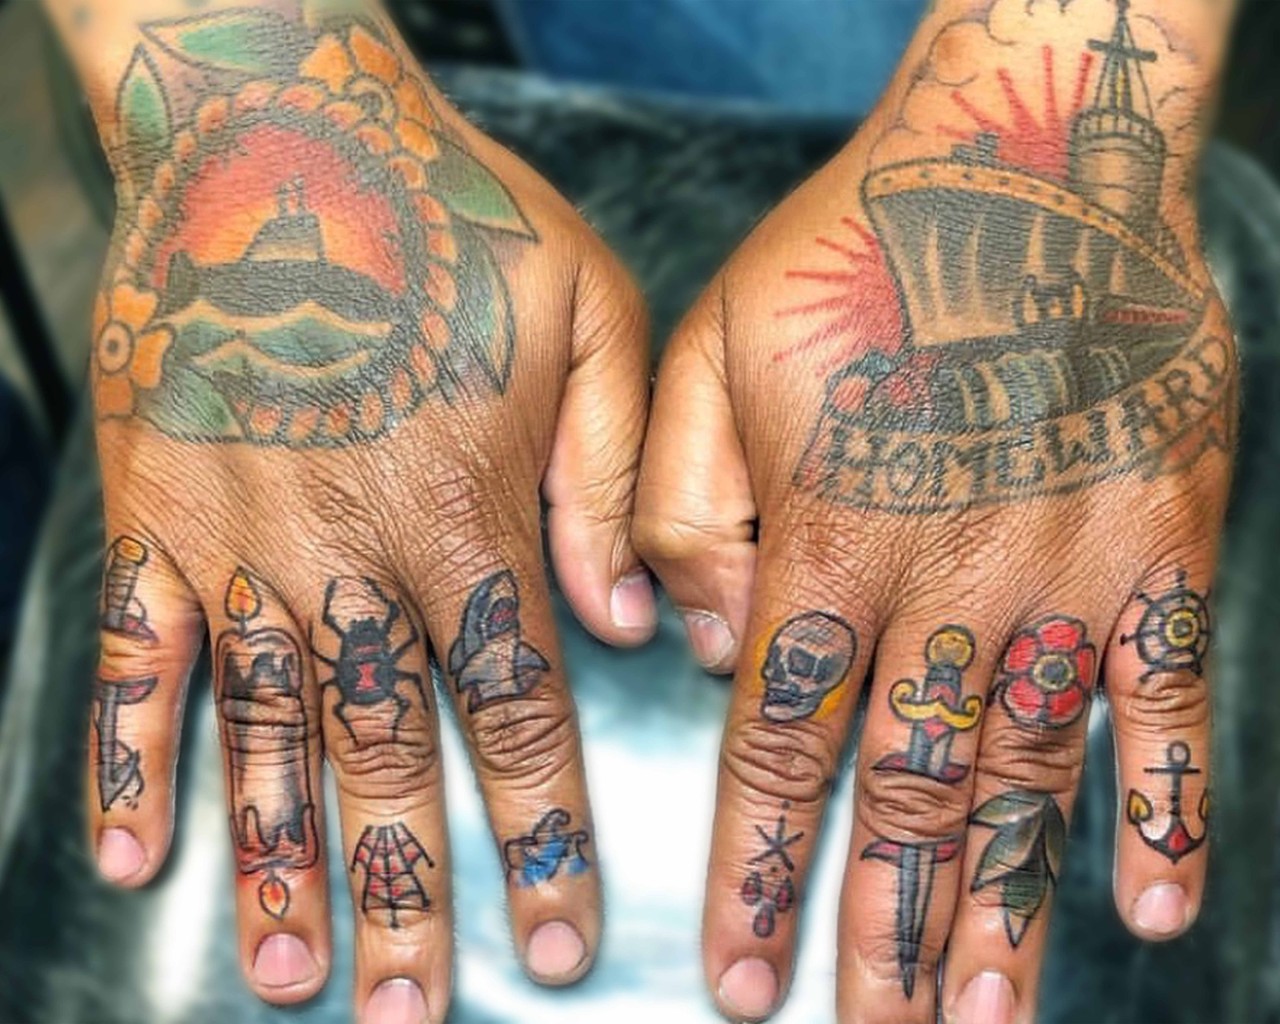 <p>Hand tattoos of a submarine, battleship with the word &quot;homeward,&quot; and individual finger tattoos of various nautical designs.</p>